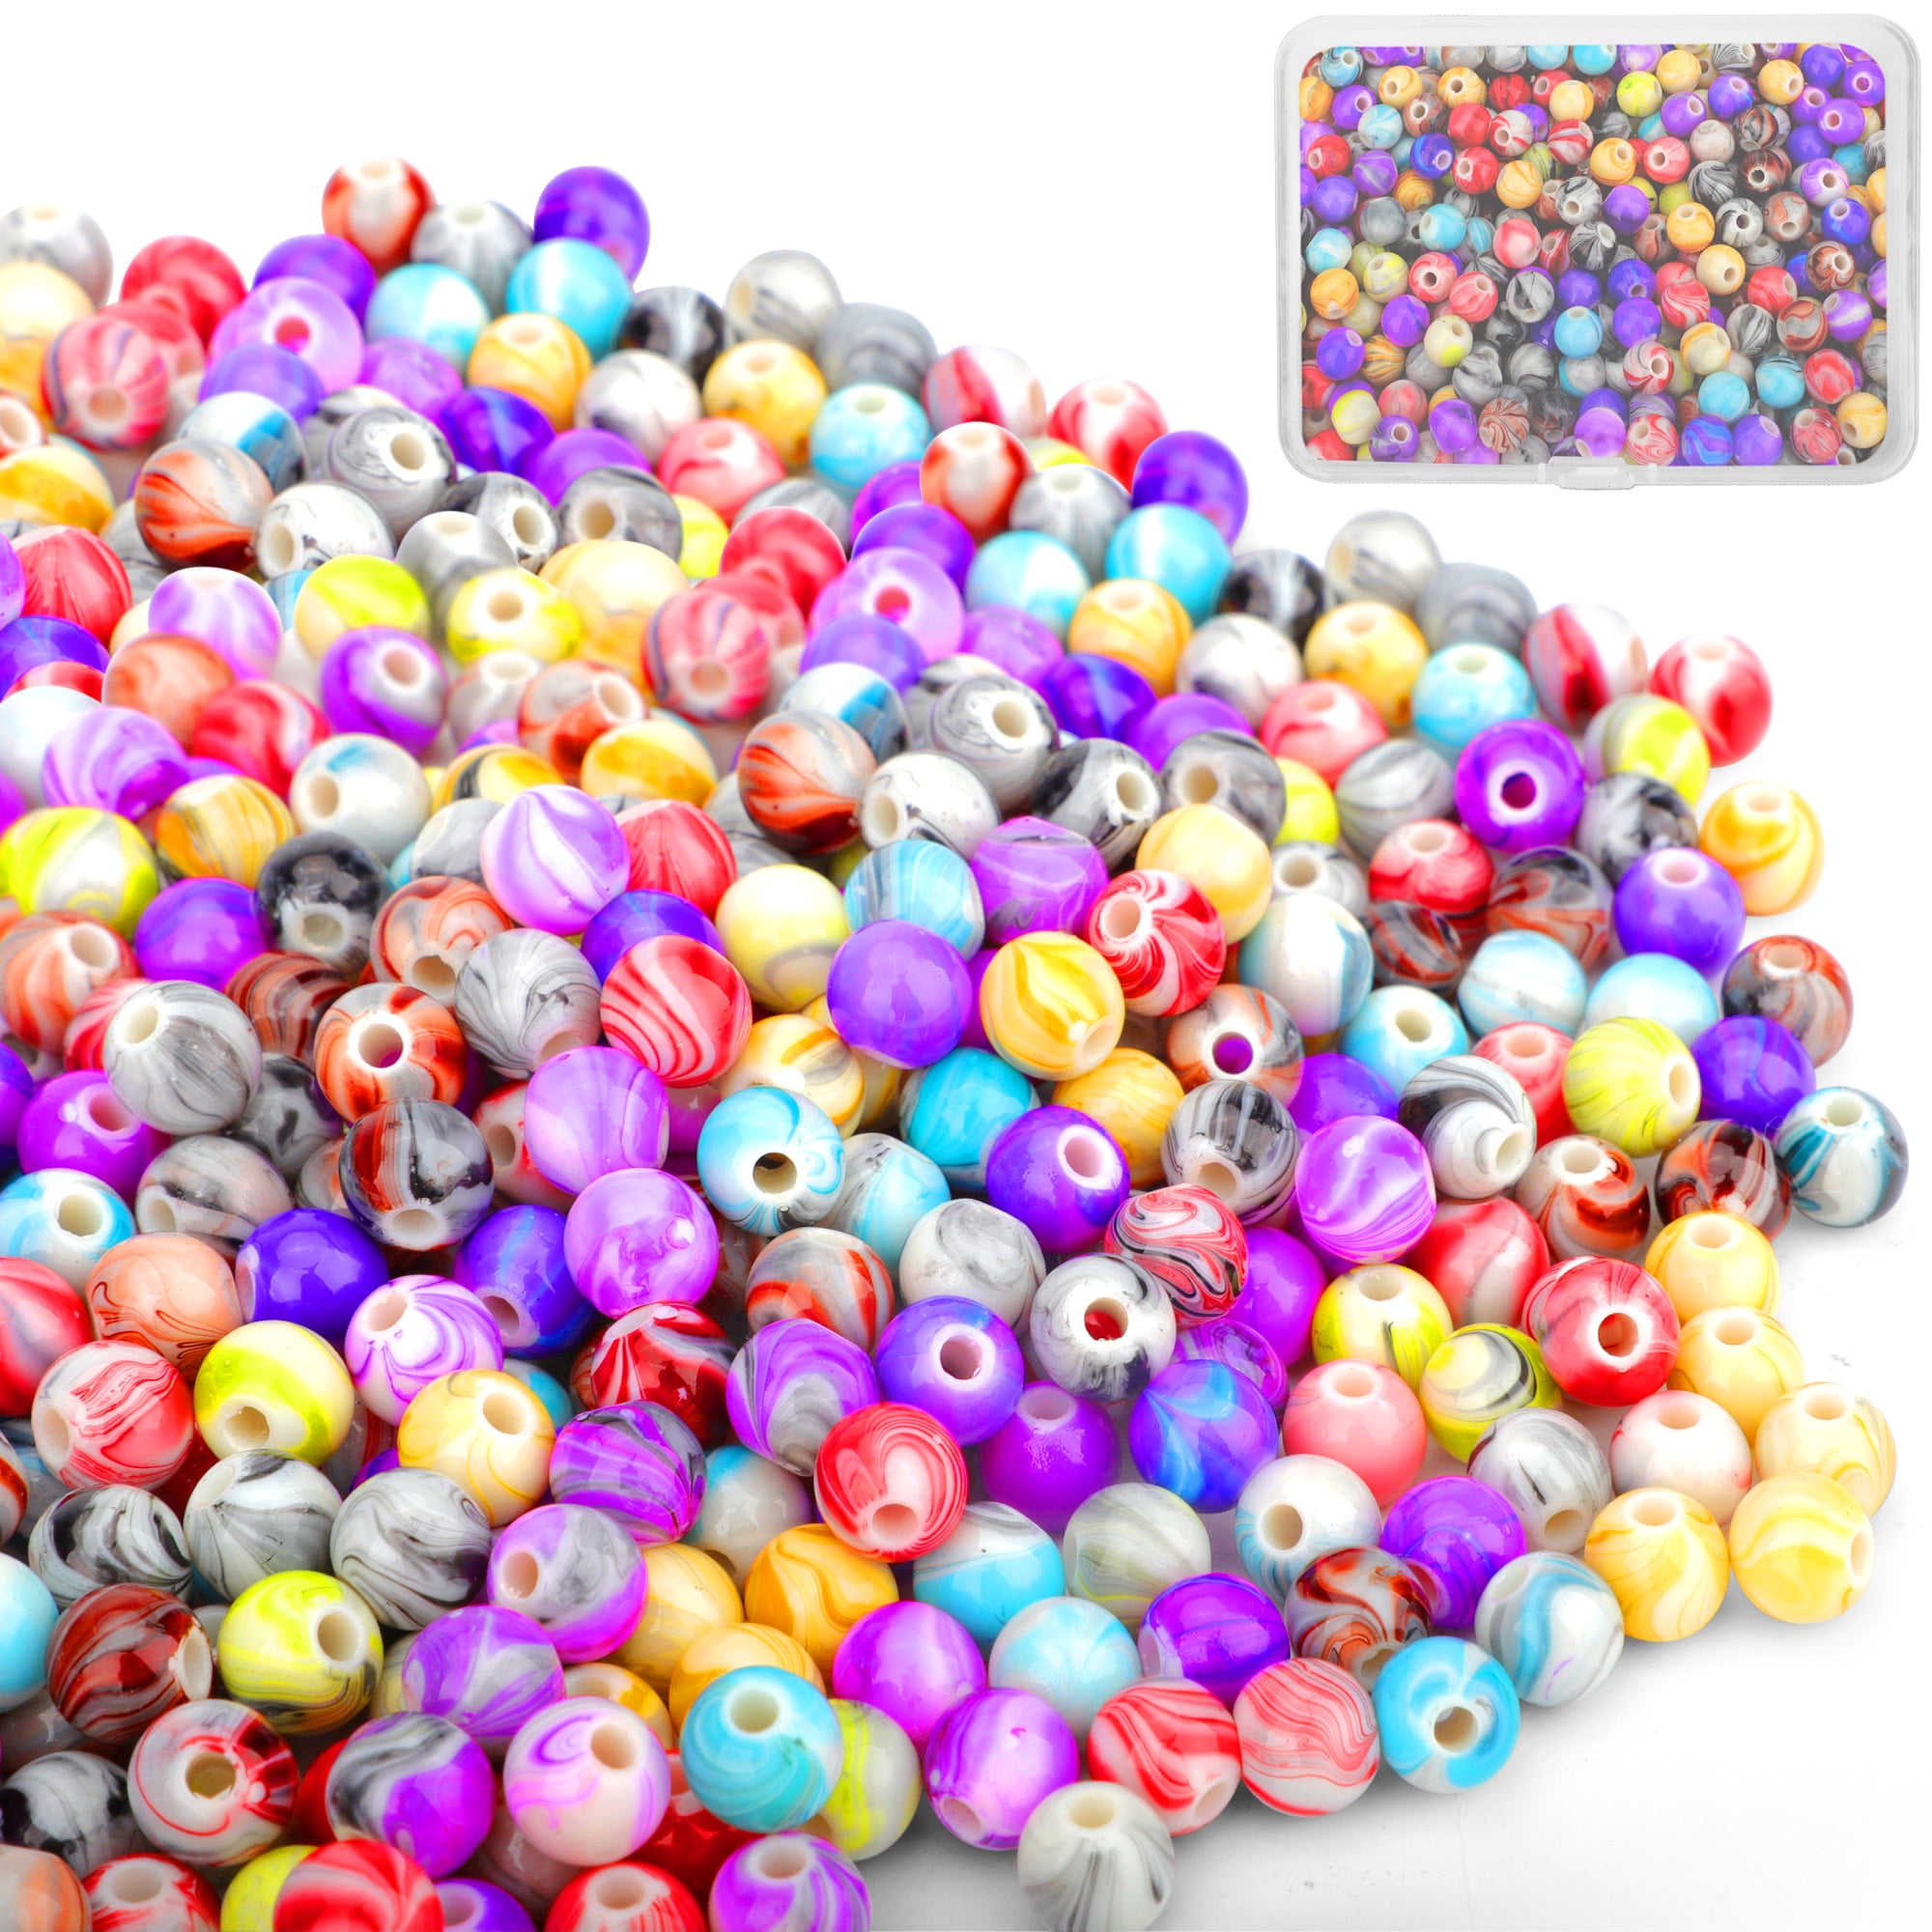 100pcs/lot Acrylic Gold Silver Color Beads 6x9mm Loose Pony Beads For  Jewelry Making Bracelet Nakelace Accessories